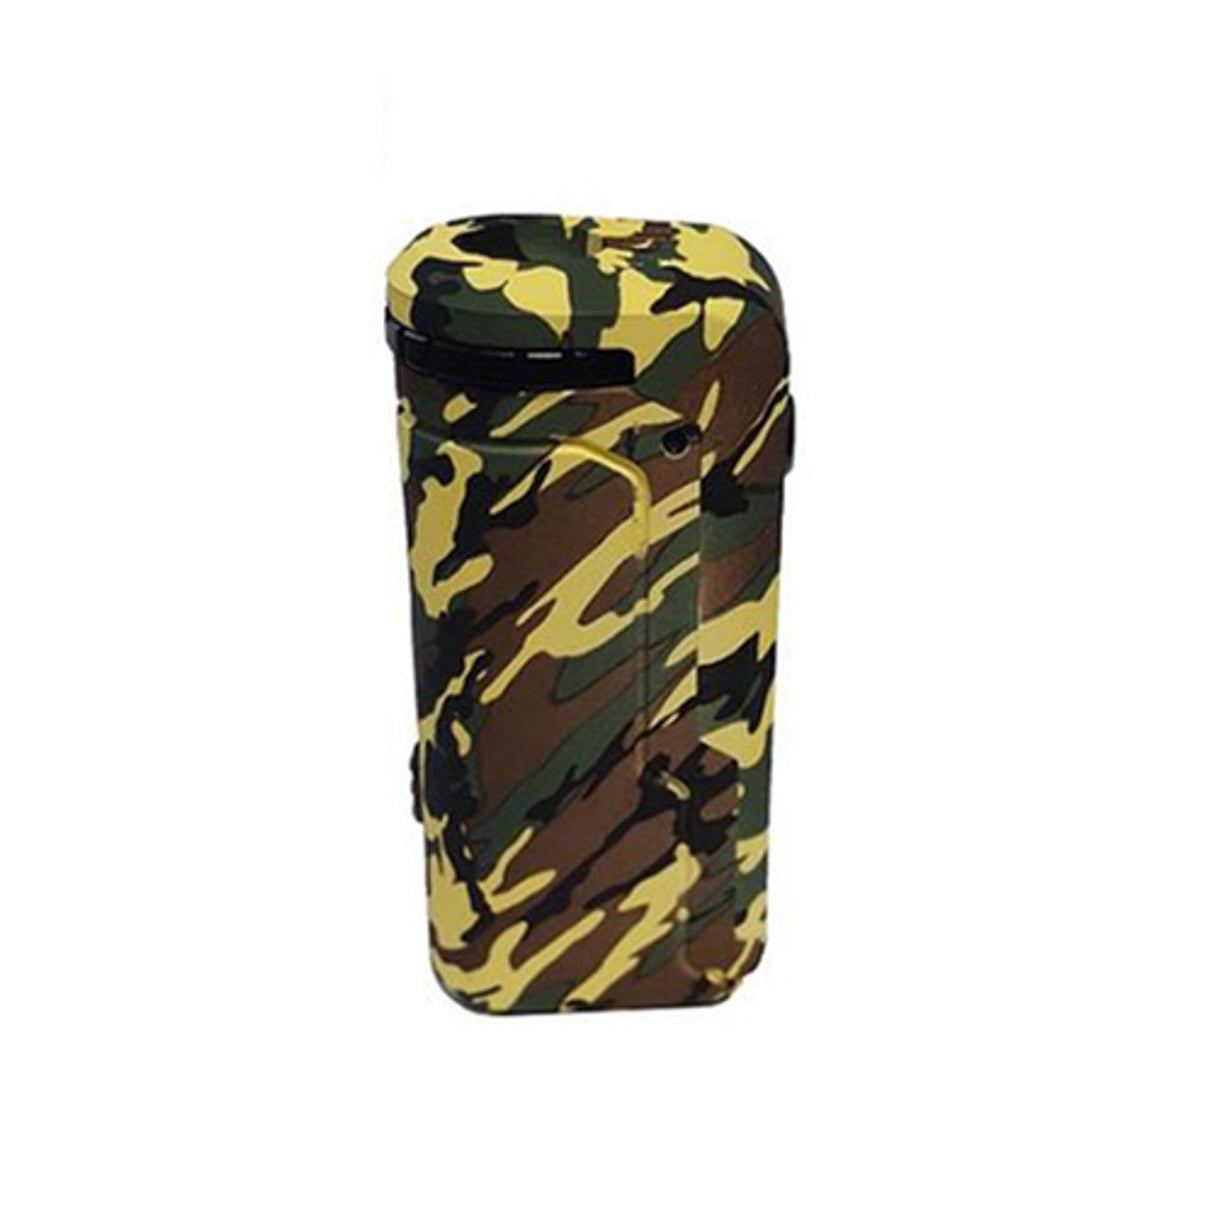 Yocan UNI Box Mod in Camouflage Design, Front View, Compact 650mAh Battery for Vaporizers